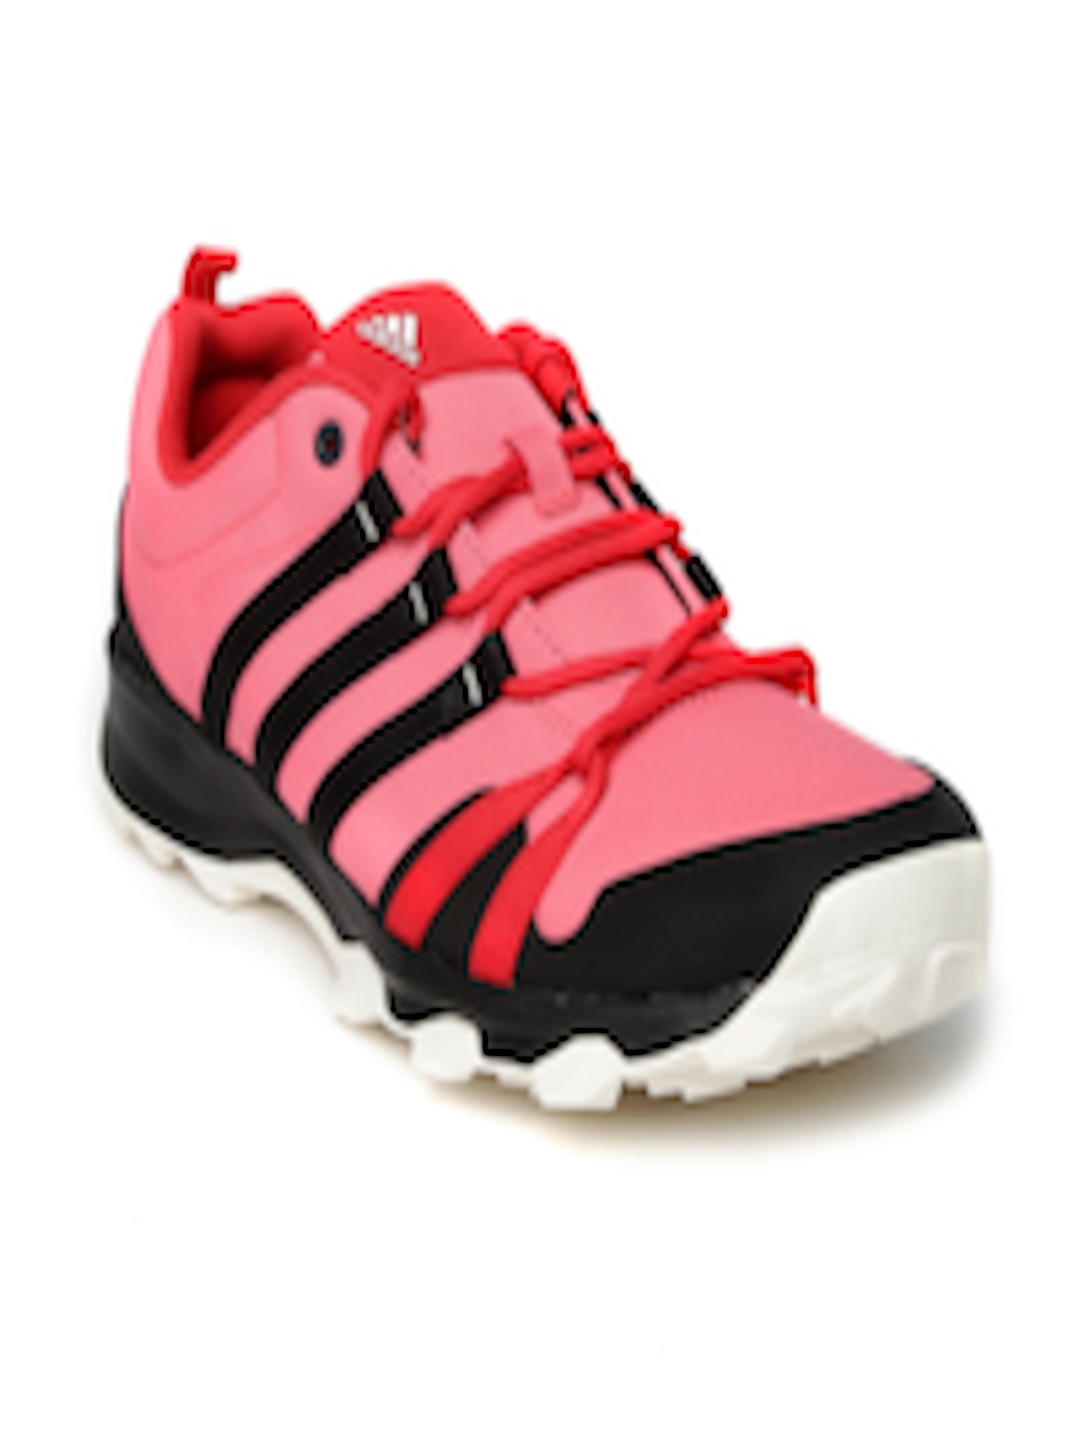 Buy ADIDAS Women Pink TRACEROCKER Running Shoes - Sports Shoes for ...